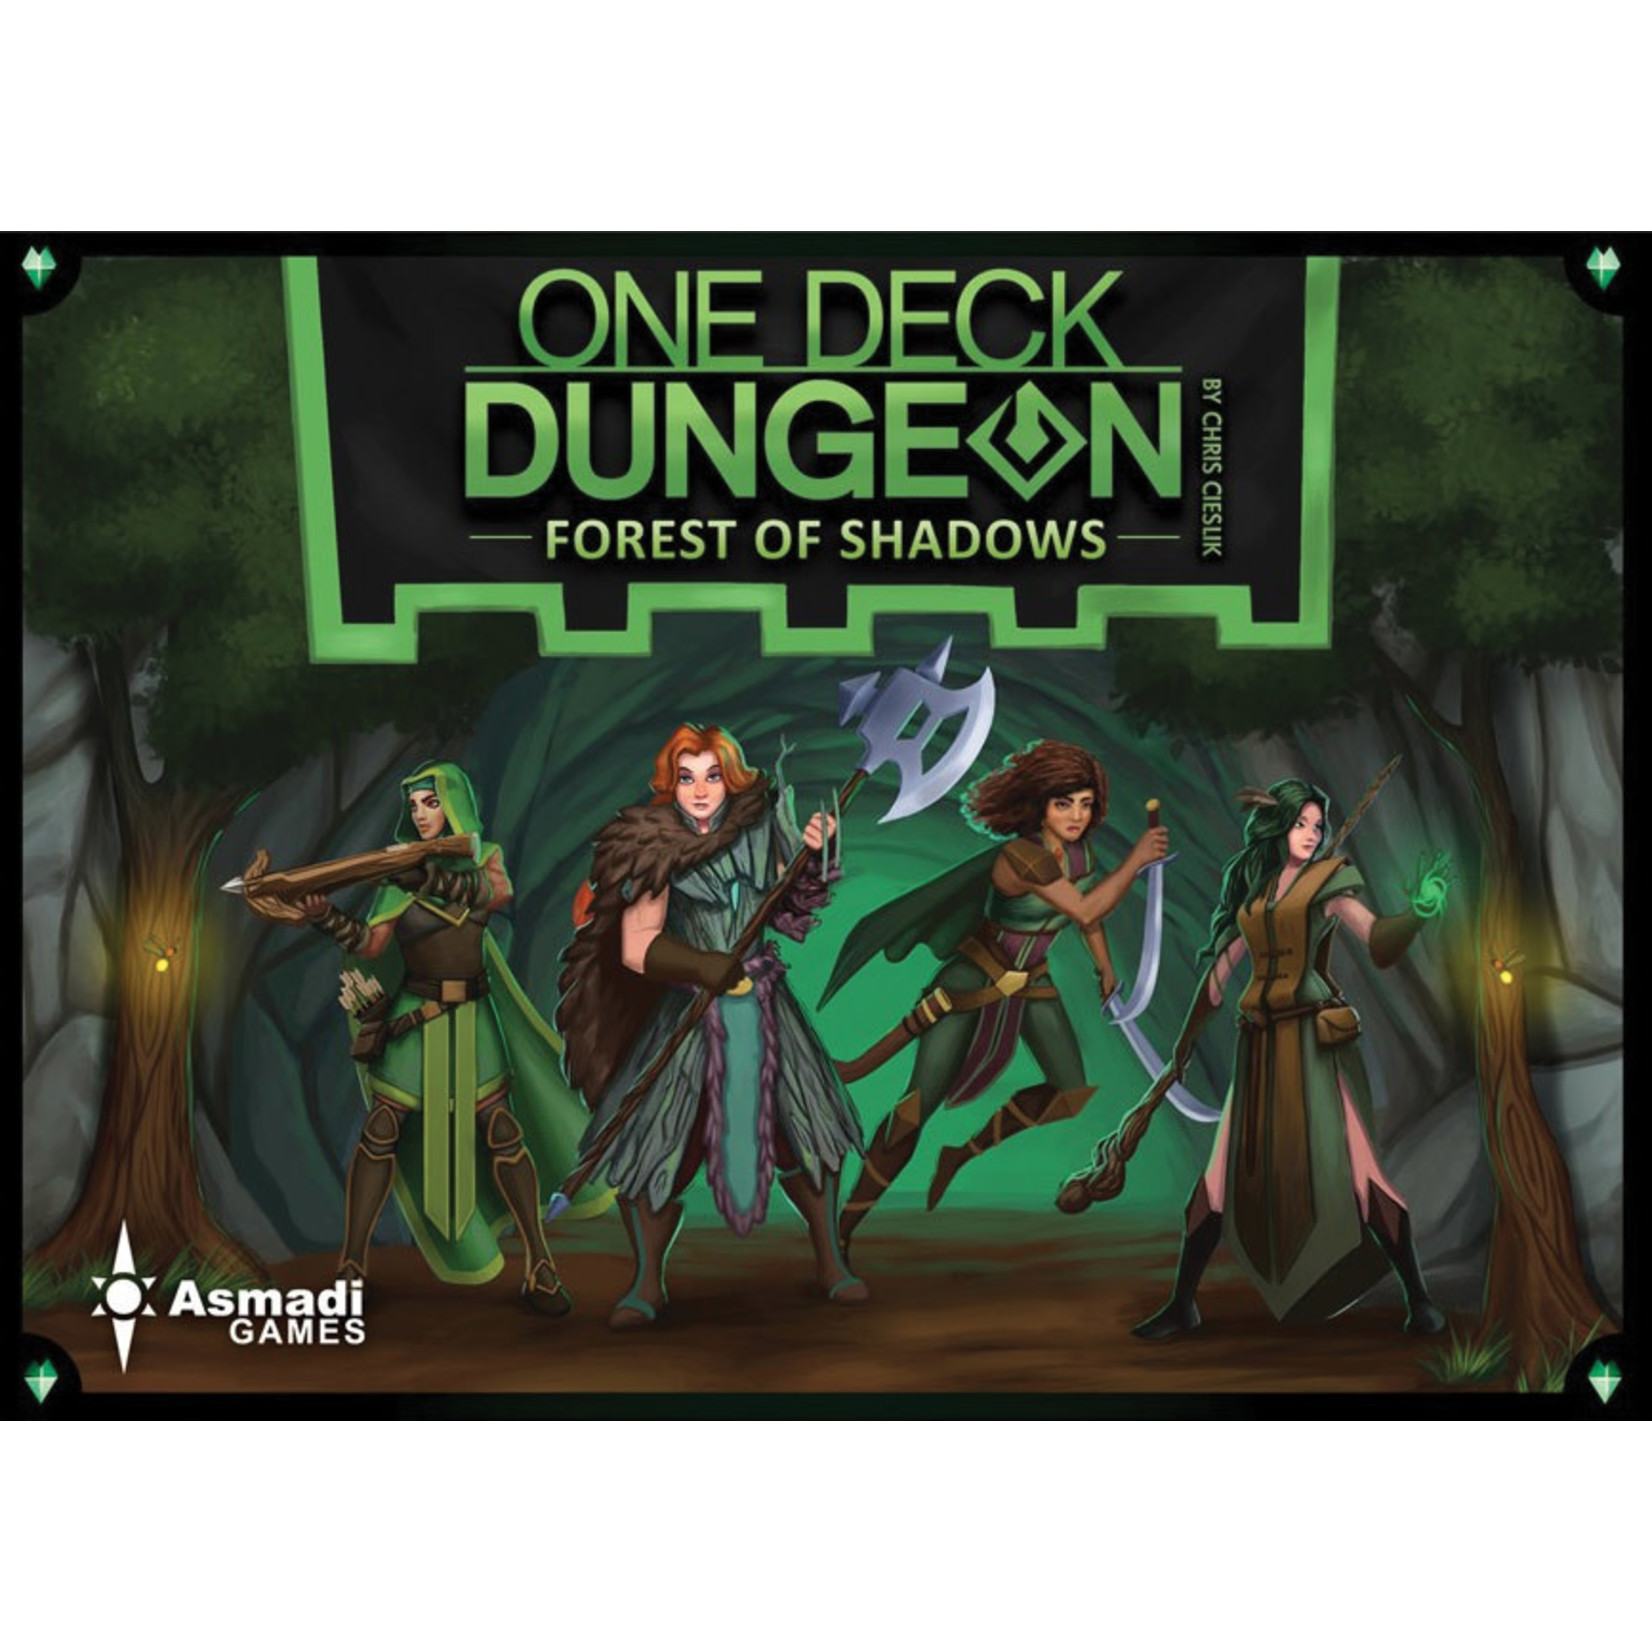 One Deck One Deck Dungeon: Forest of Shadows